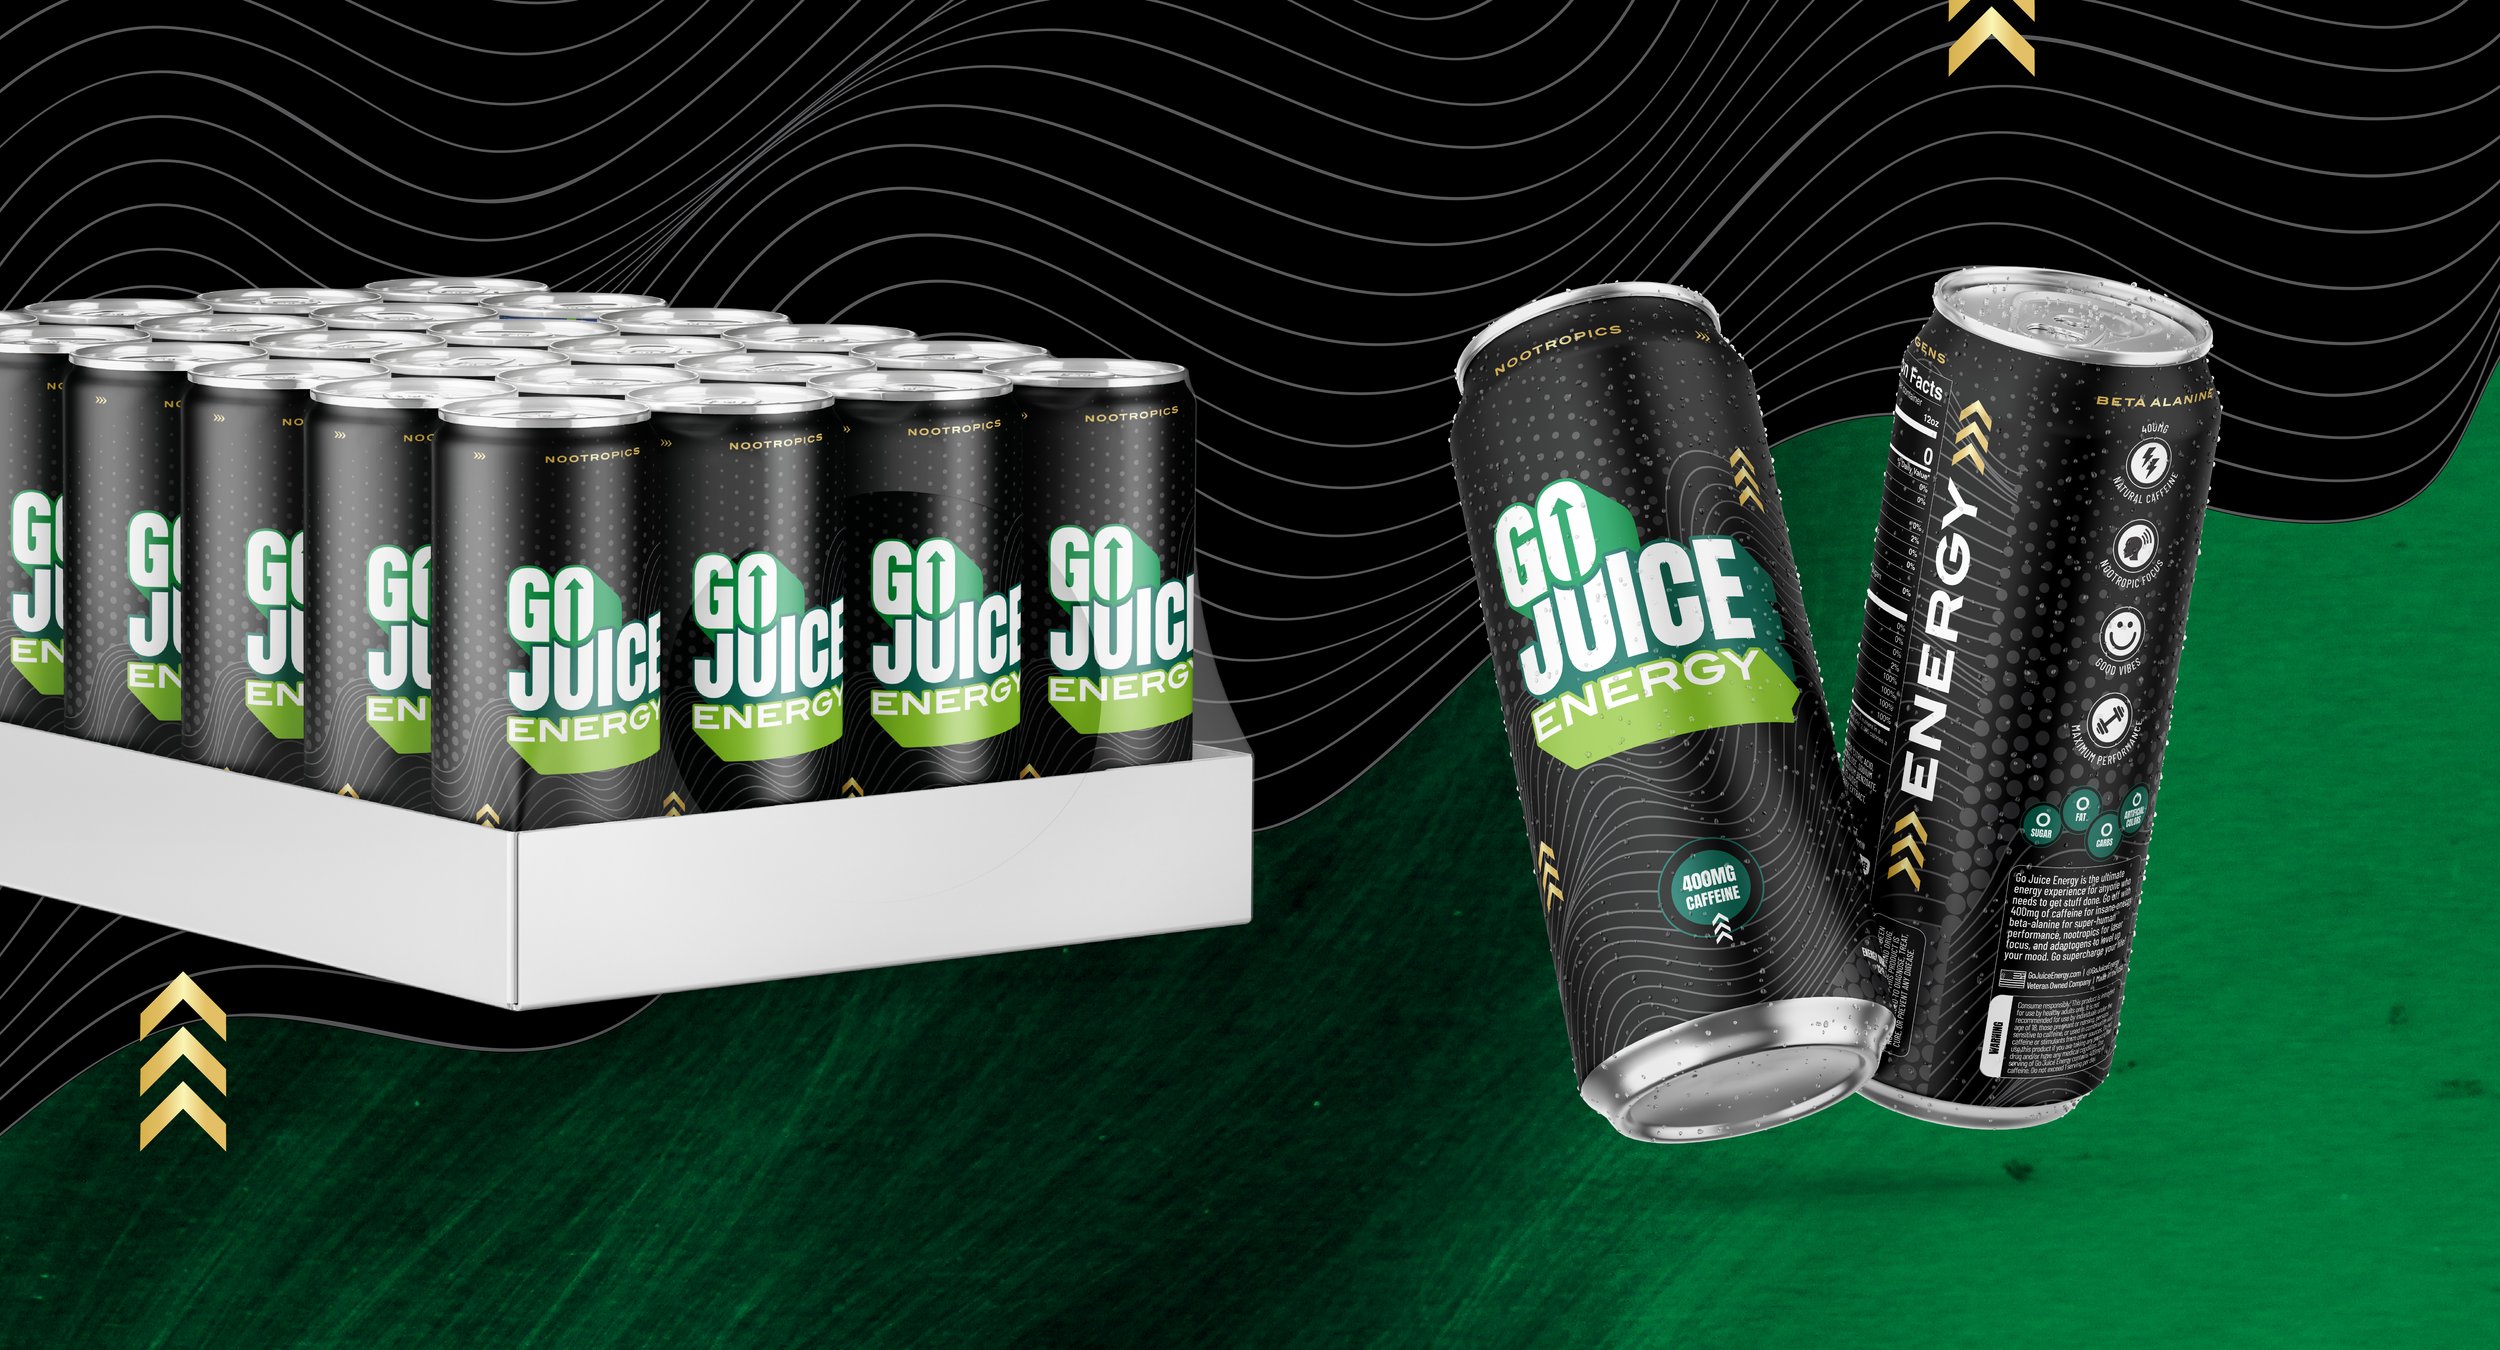 Go Juice Energy Logo and Packaging Graphic Design_3.jpg